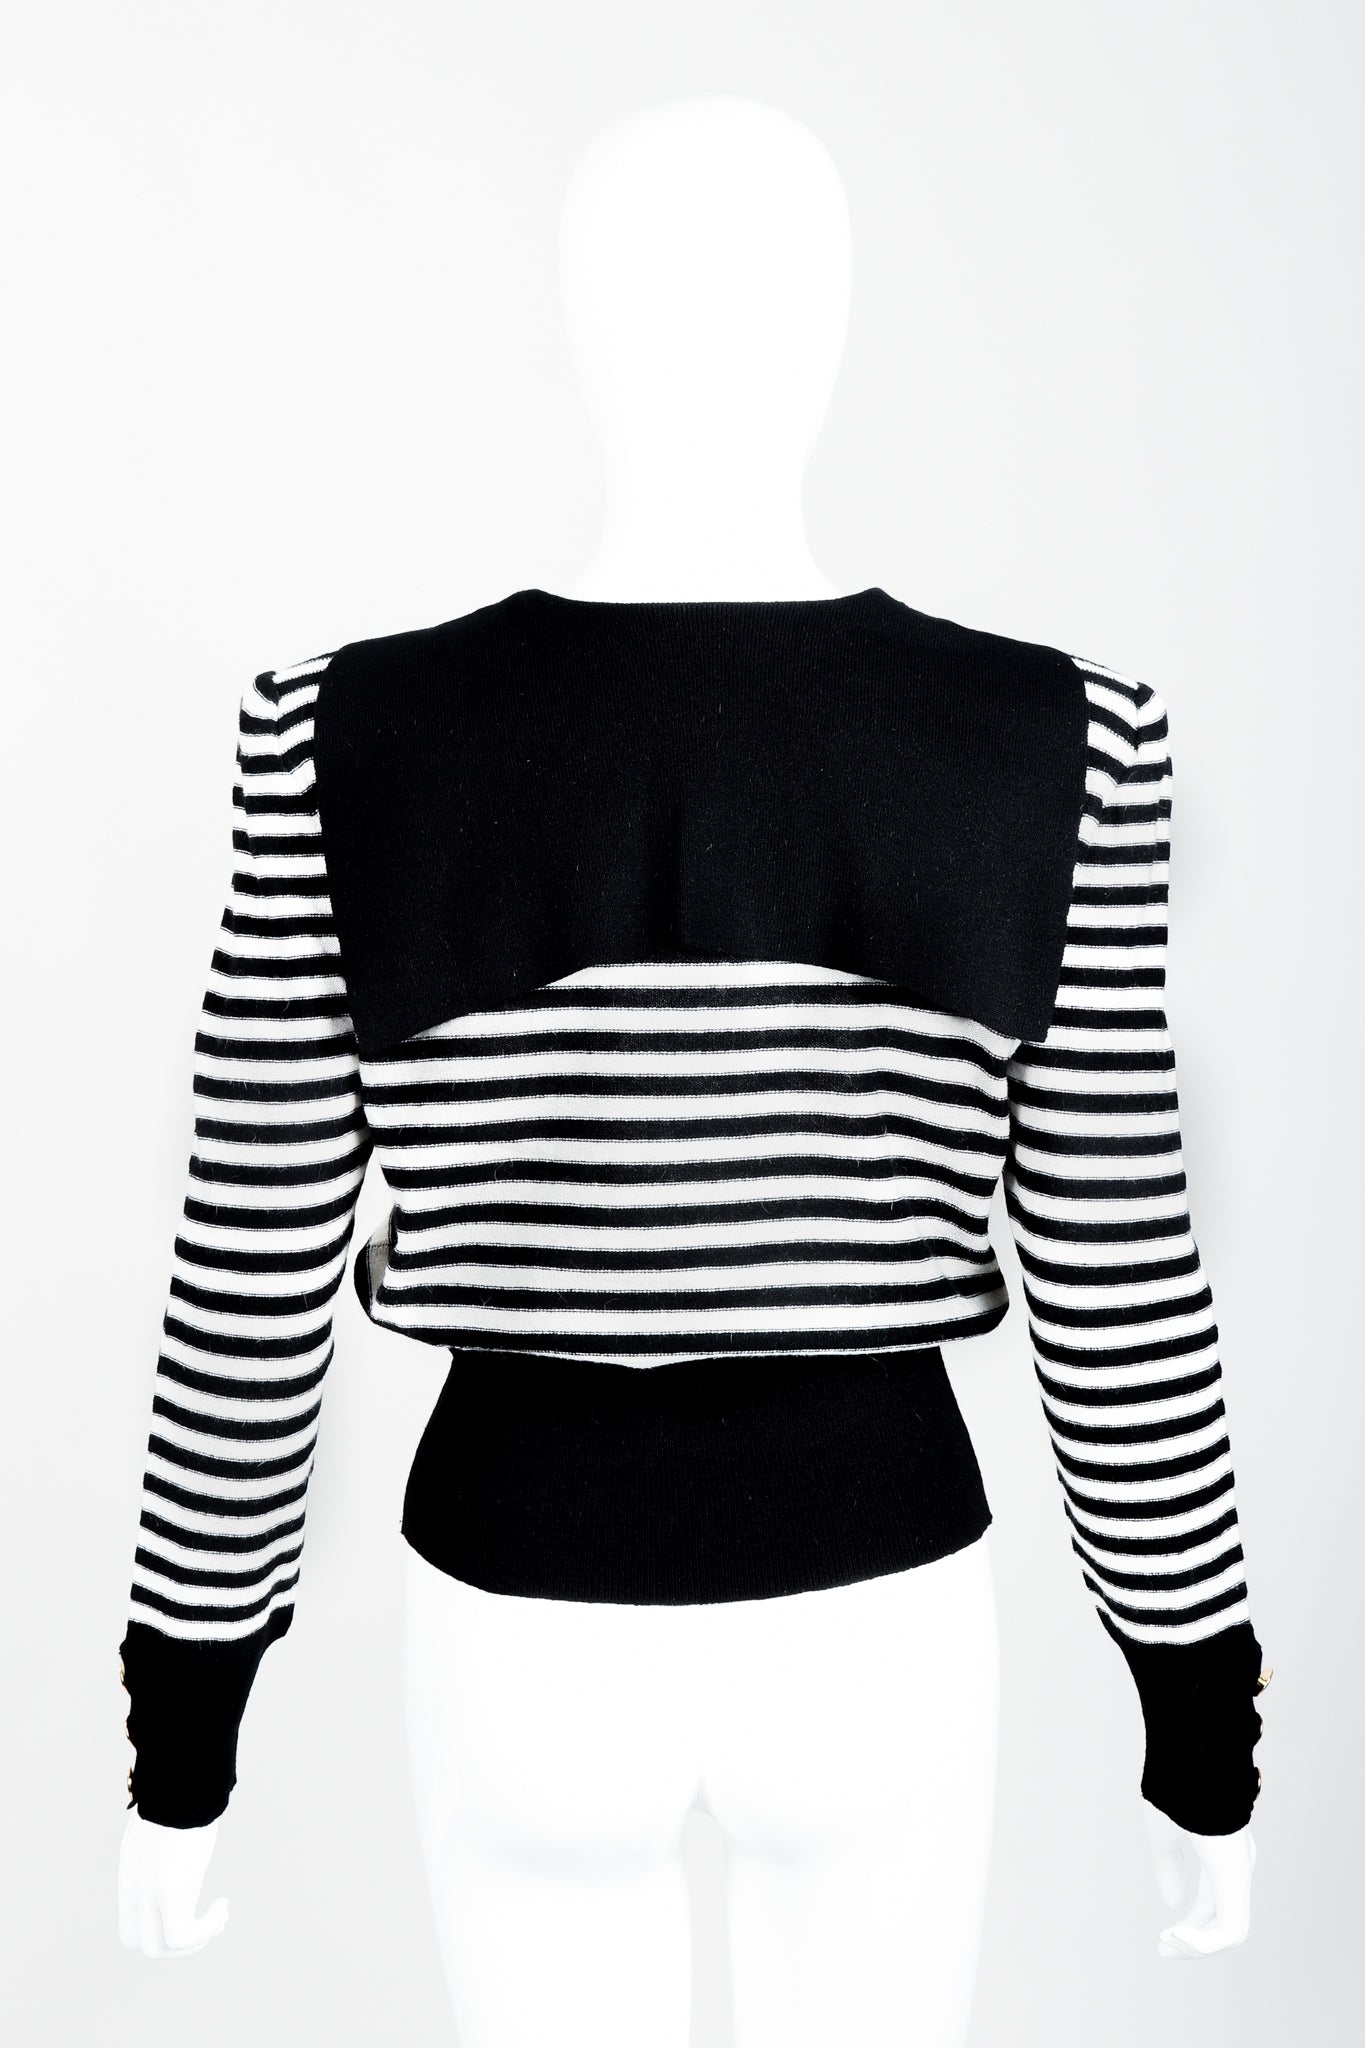 Vintage Sonia Rykiel White Stripe Knit Sailor Sweater on Mannequin back at Recess